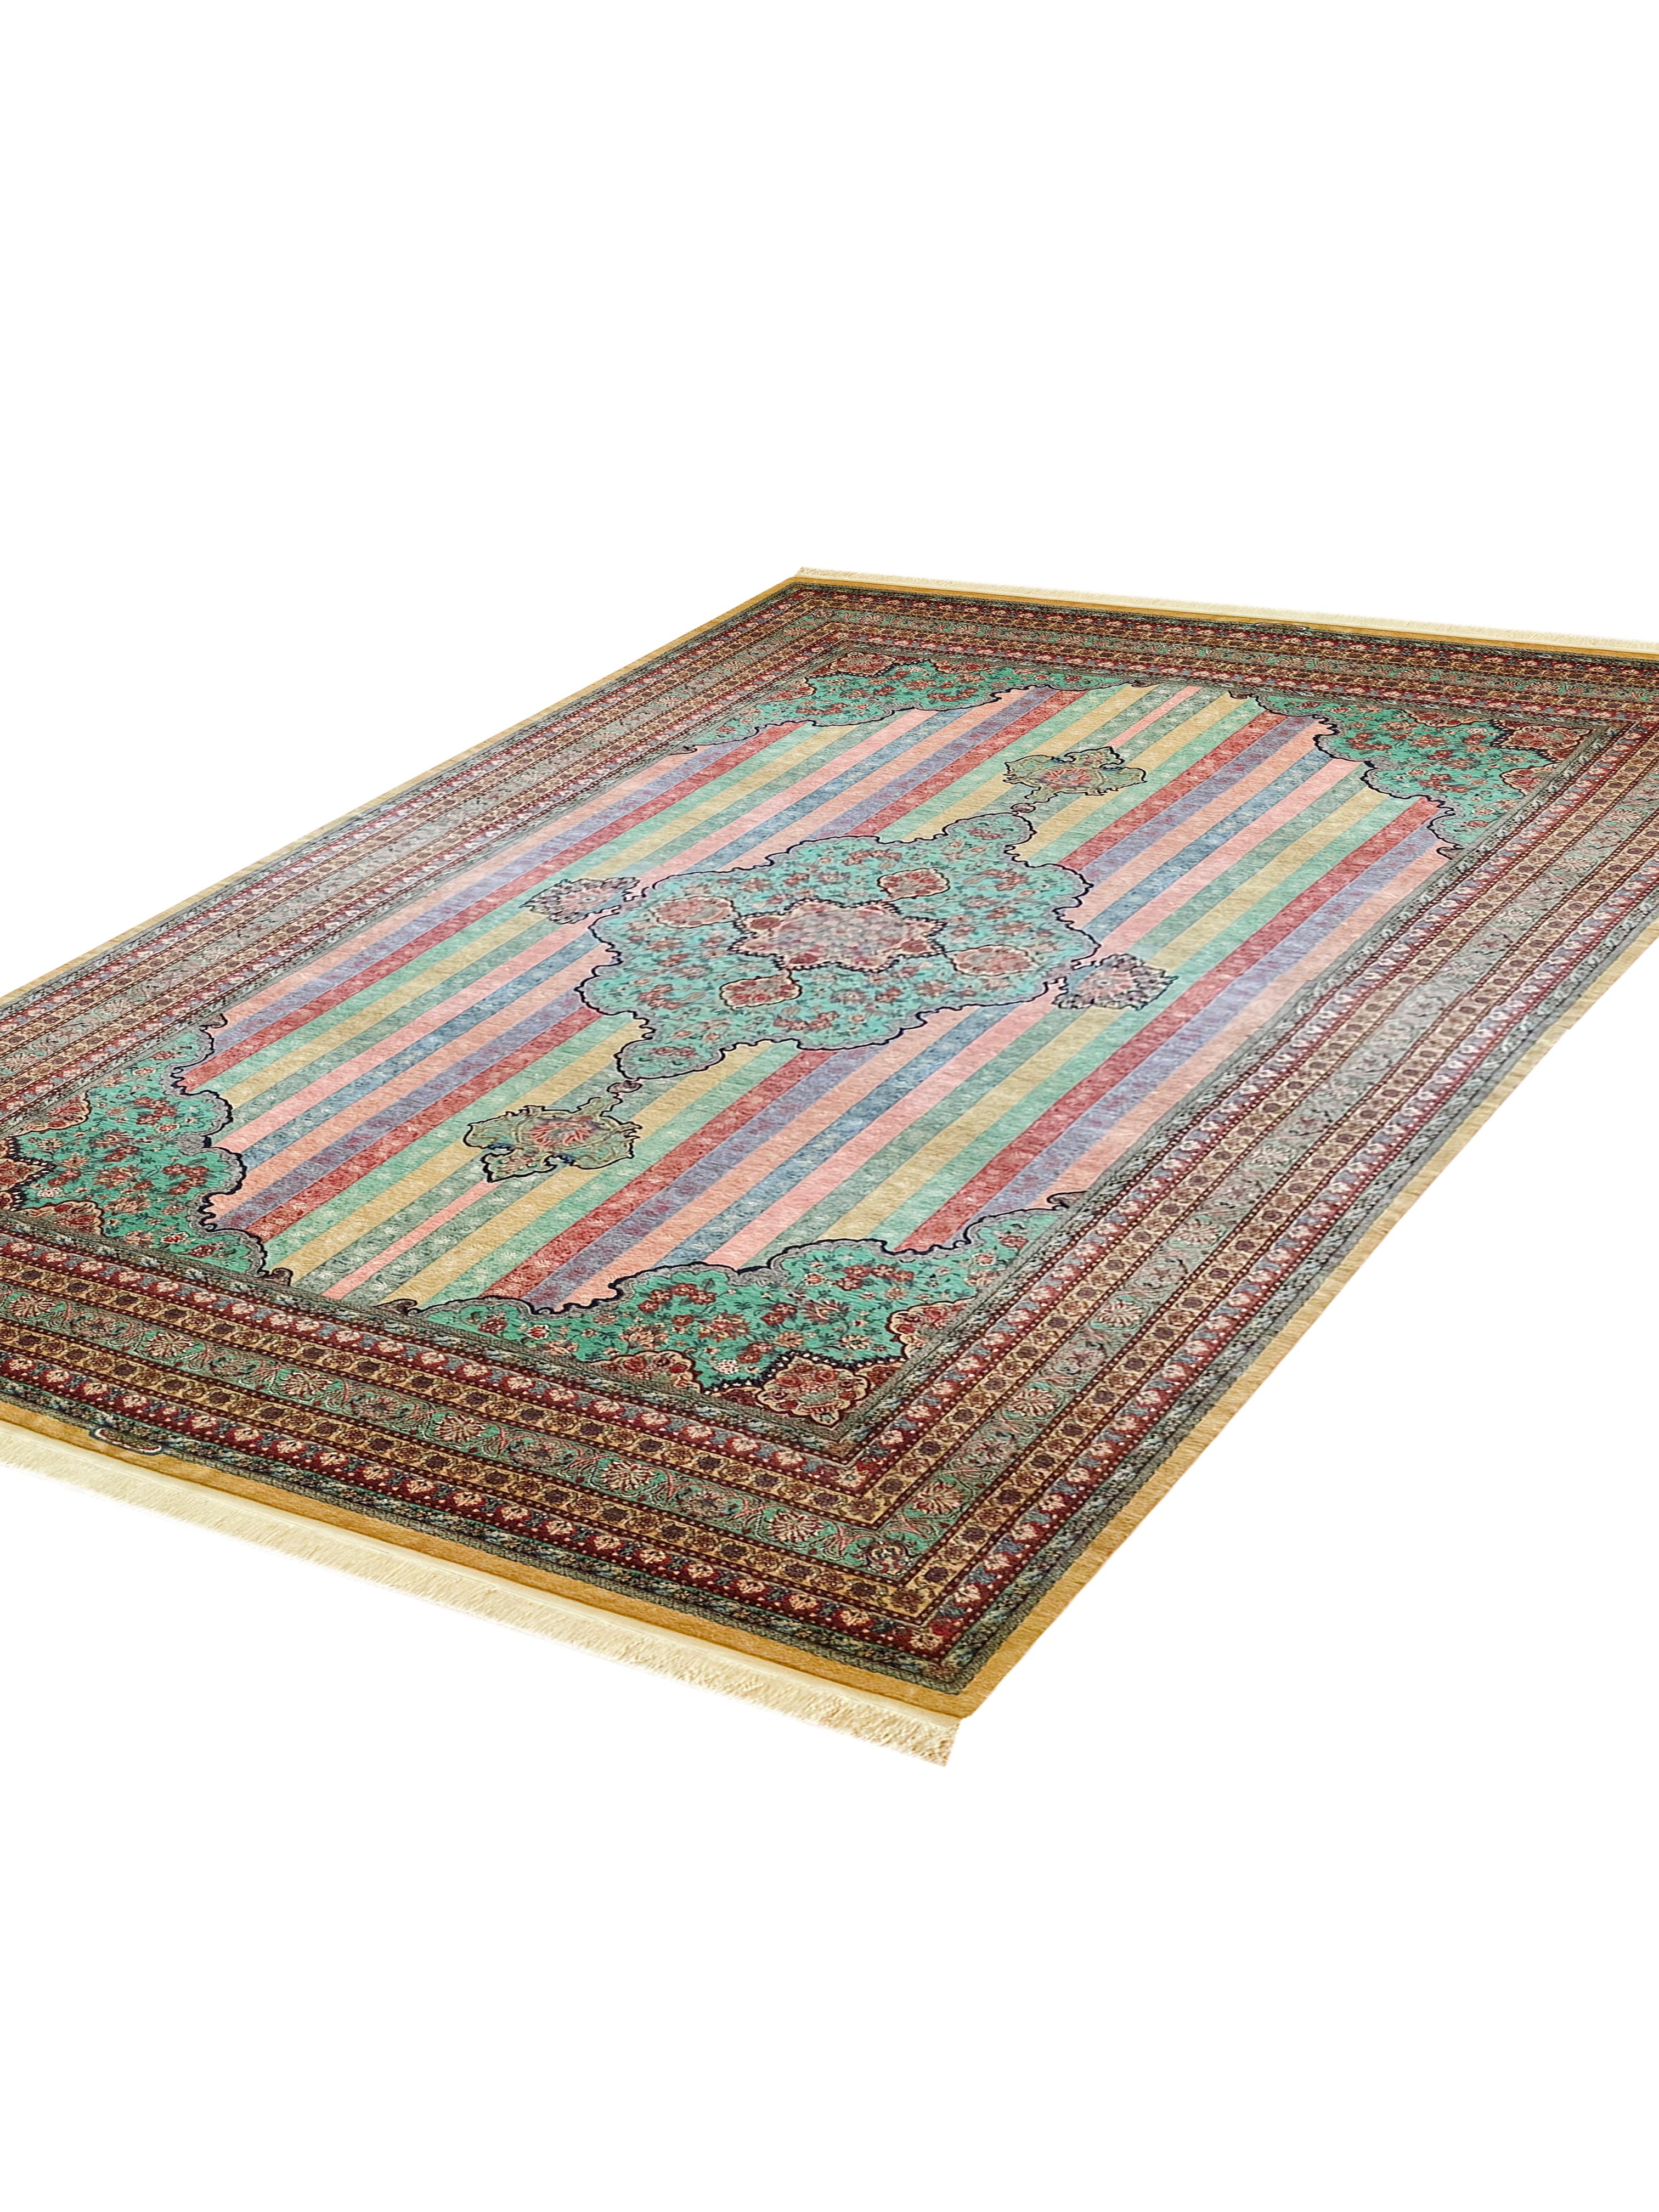 Hand-Knotted Oversized Carpet Striped Rug, Fine Exclusive Handmade Wool Silk Kurdish Rug  For Sale